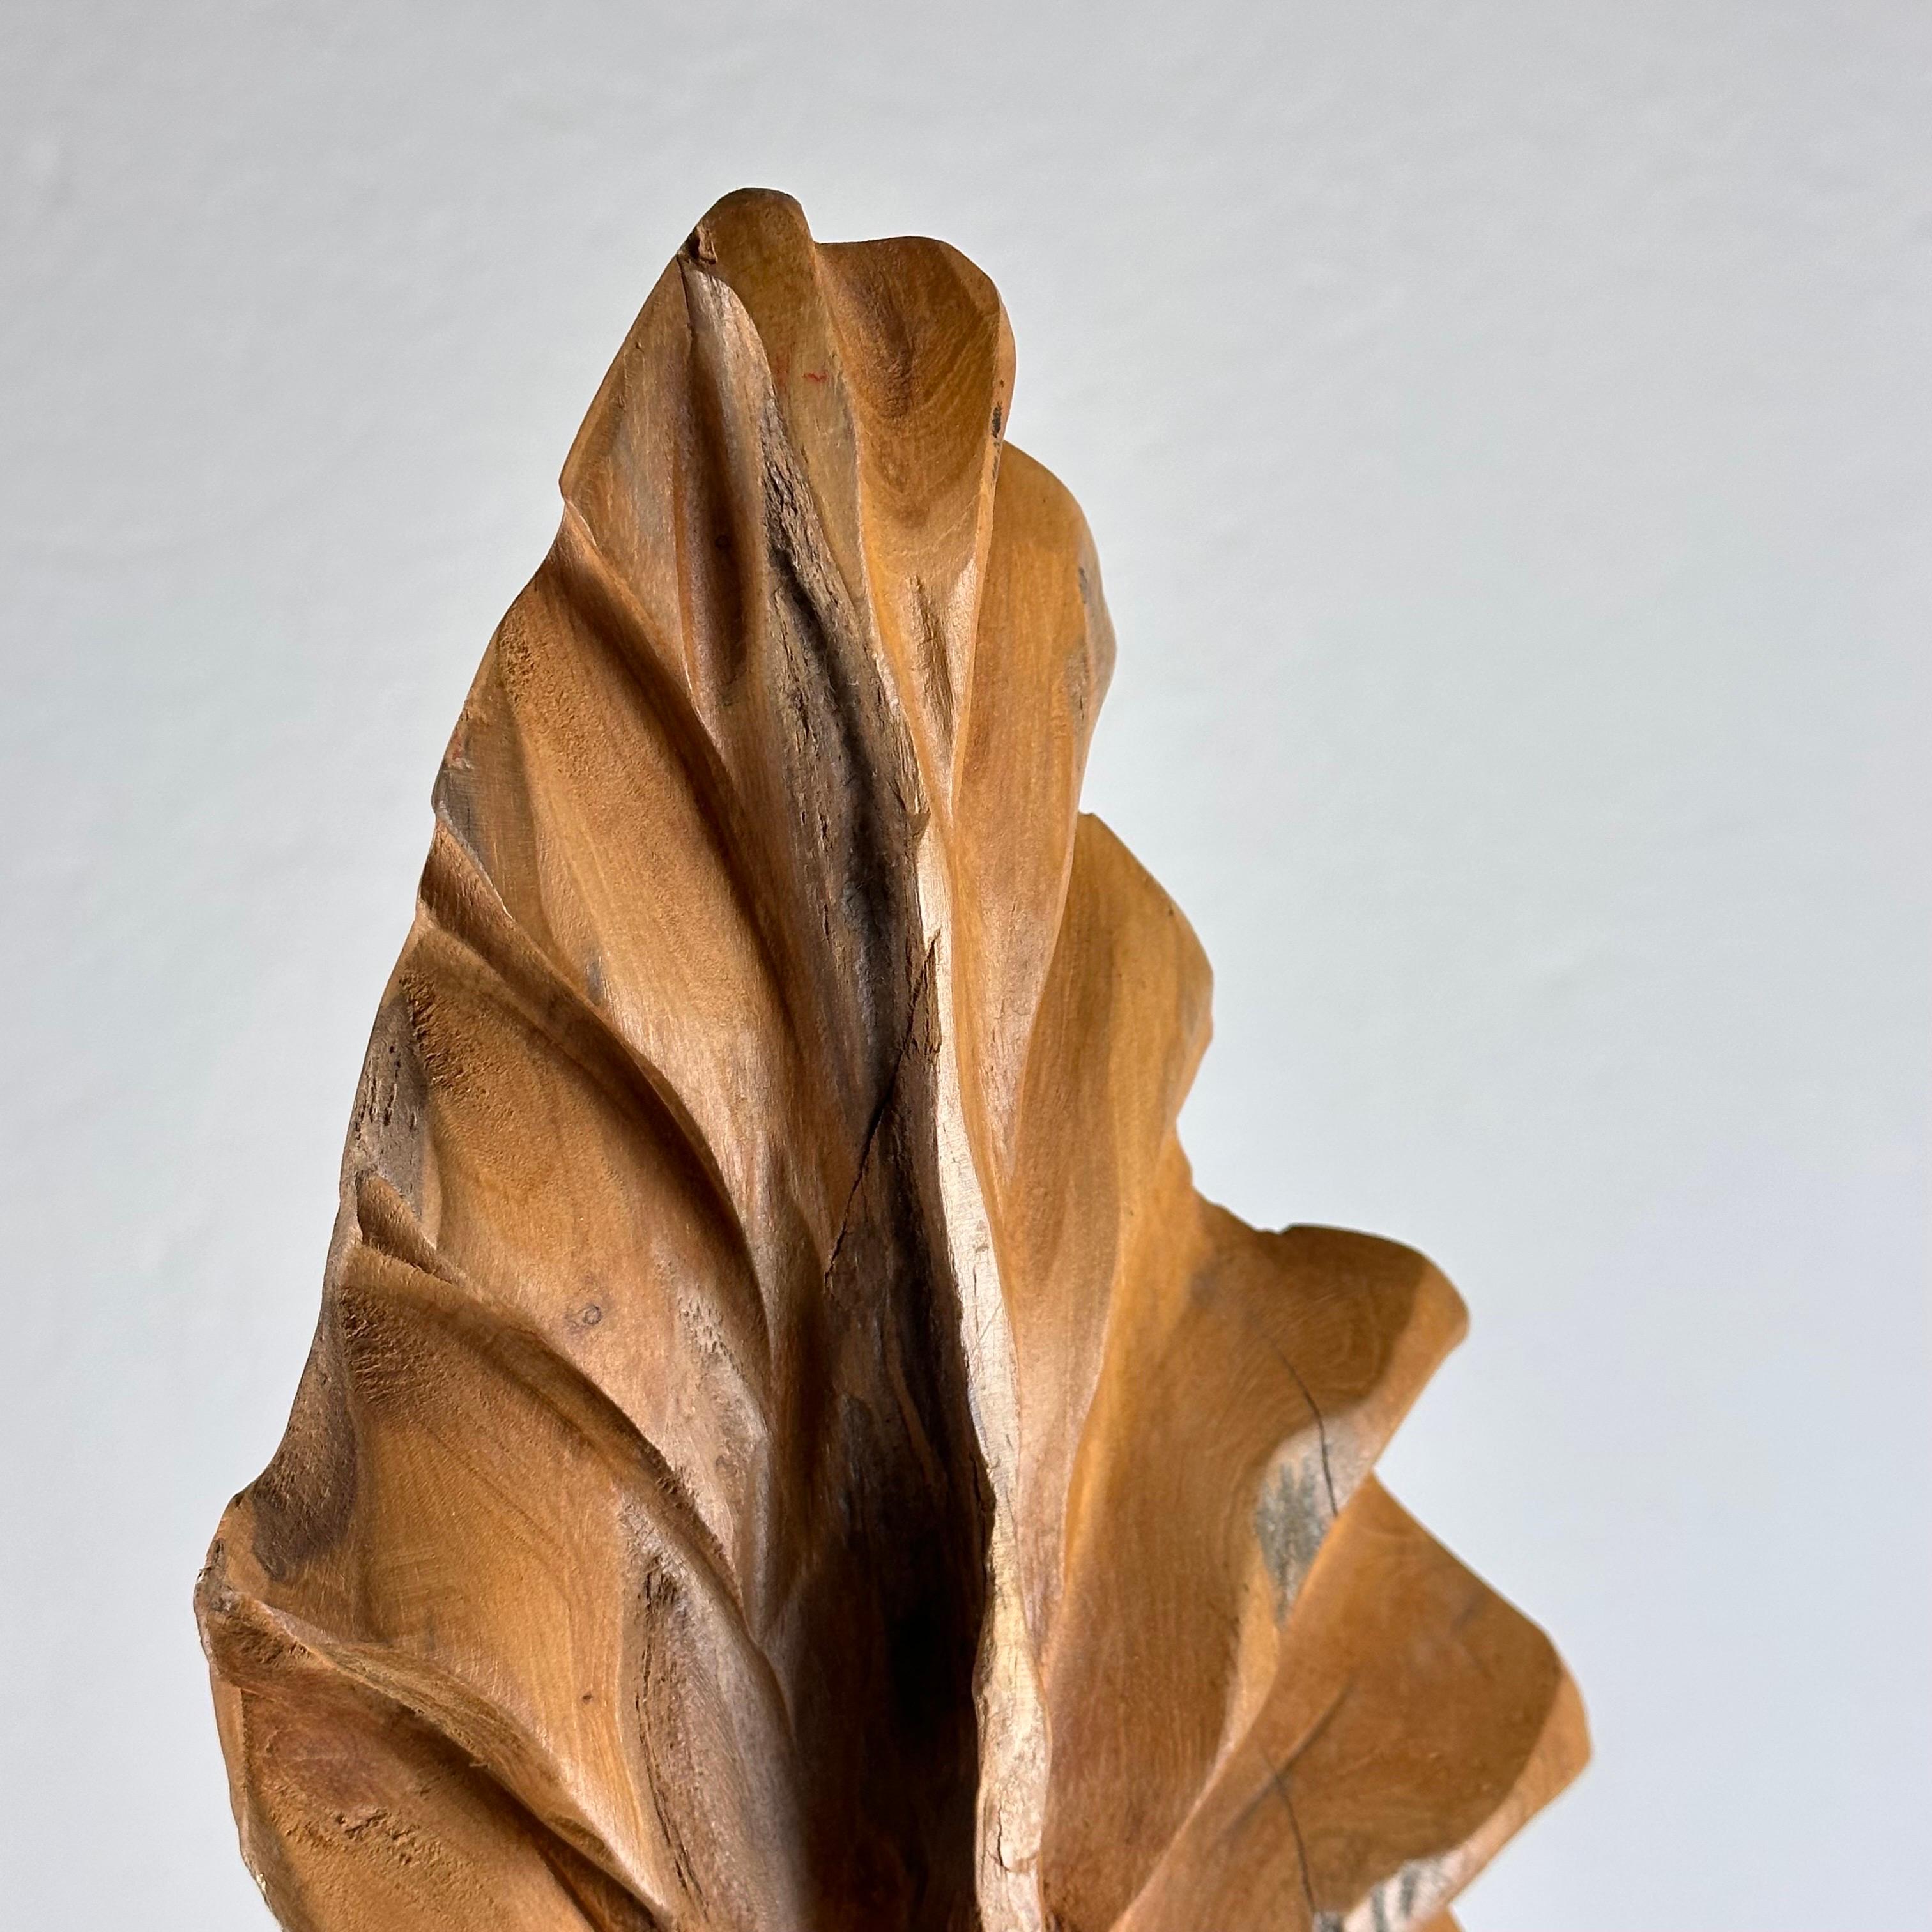 Exquisite Italian Phytomorphic Abstract Sculpture in Natural Ash, 1960s For Sale 2